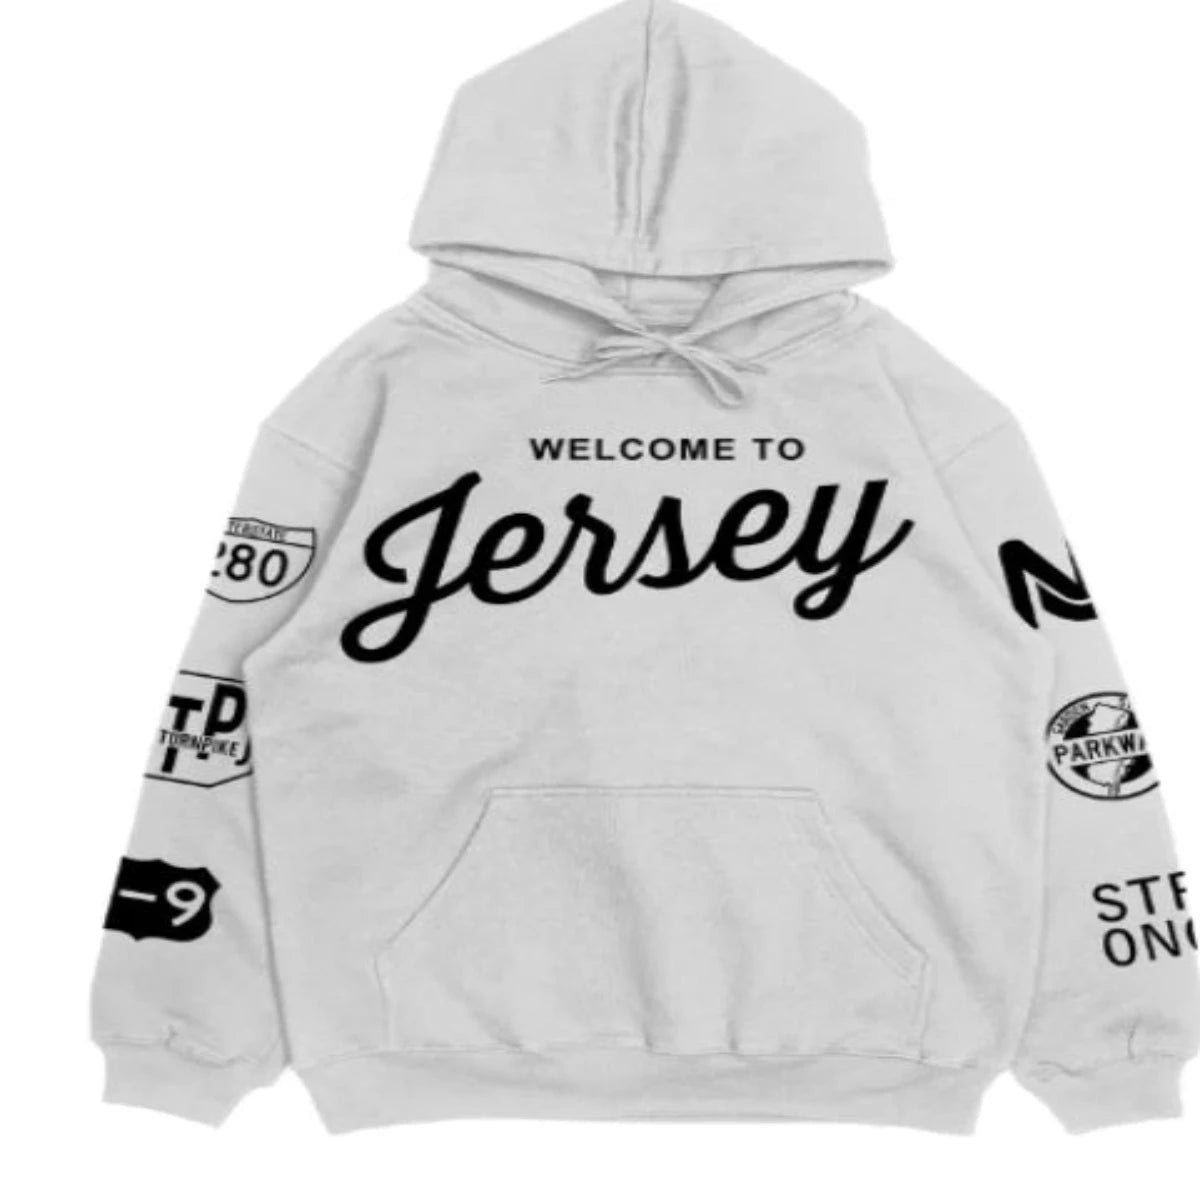 jersey strong hoodies